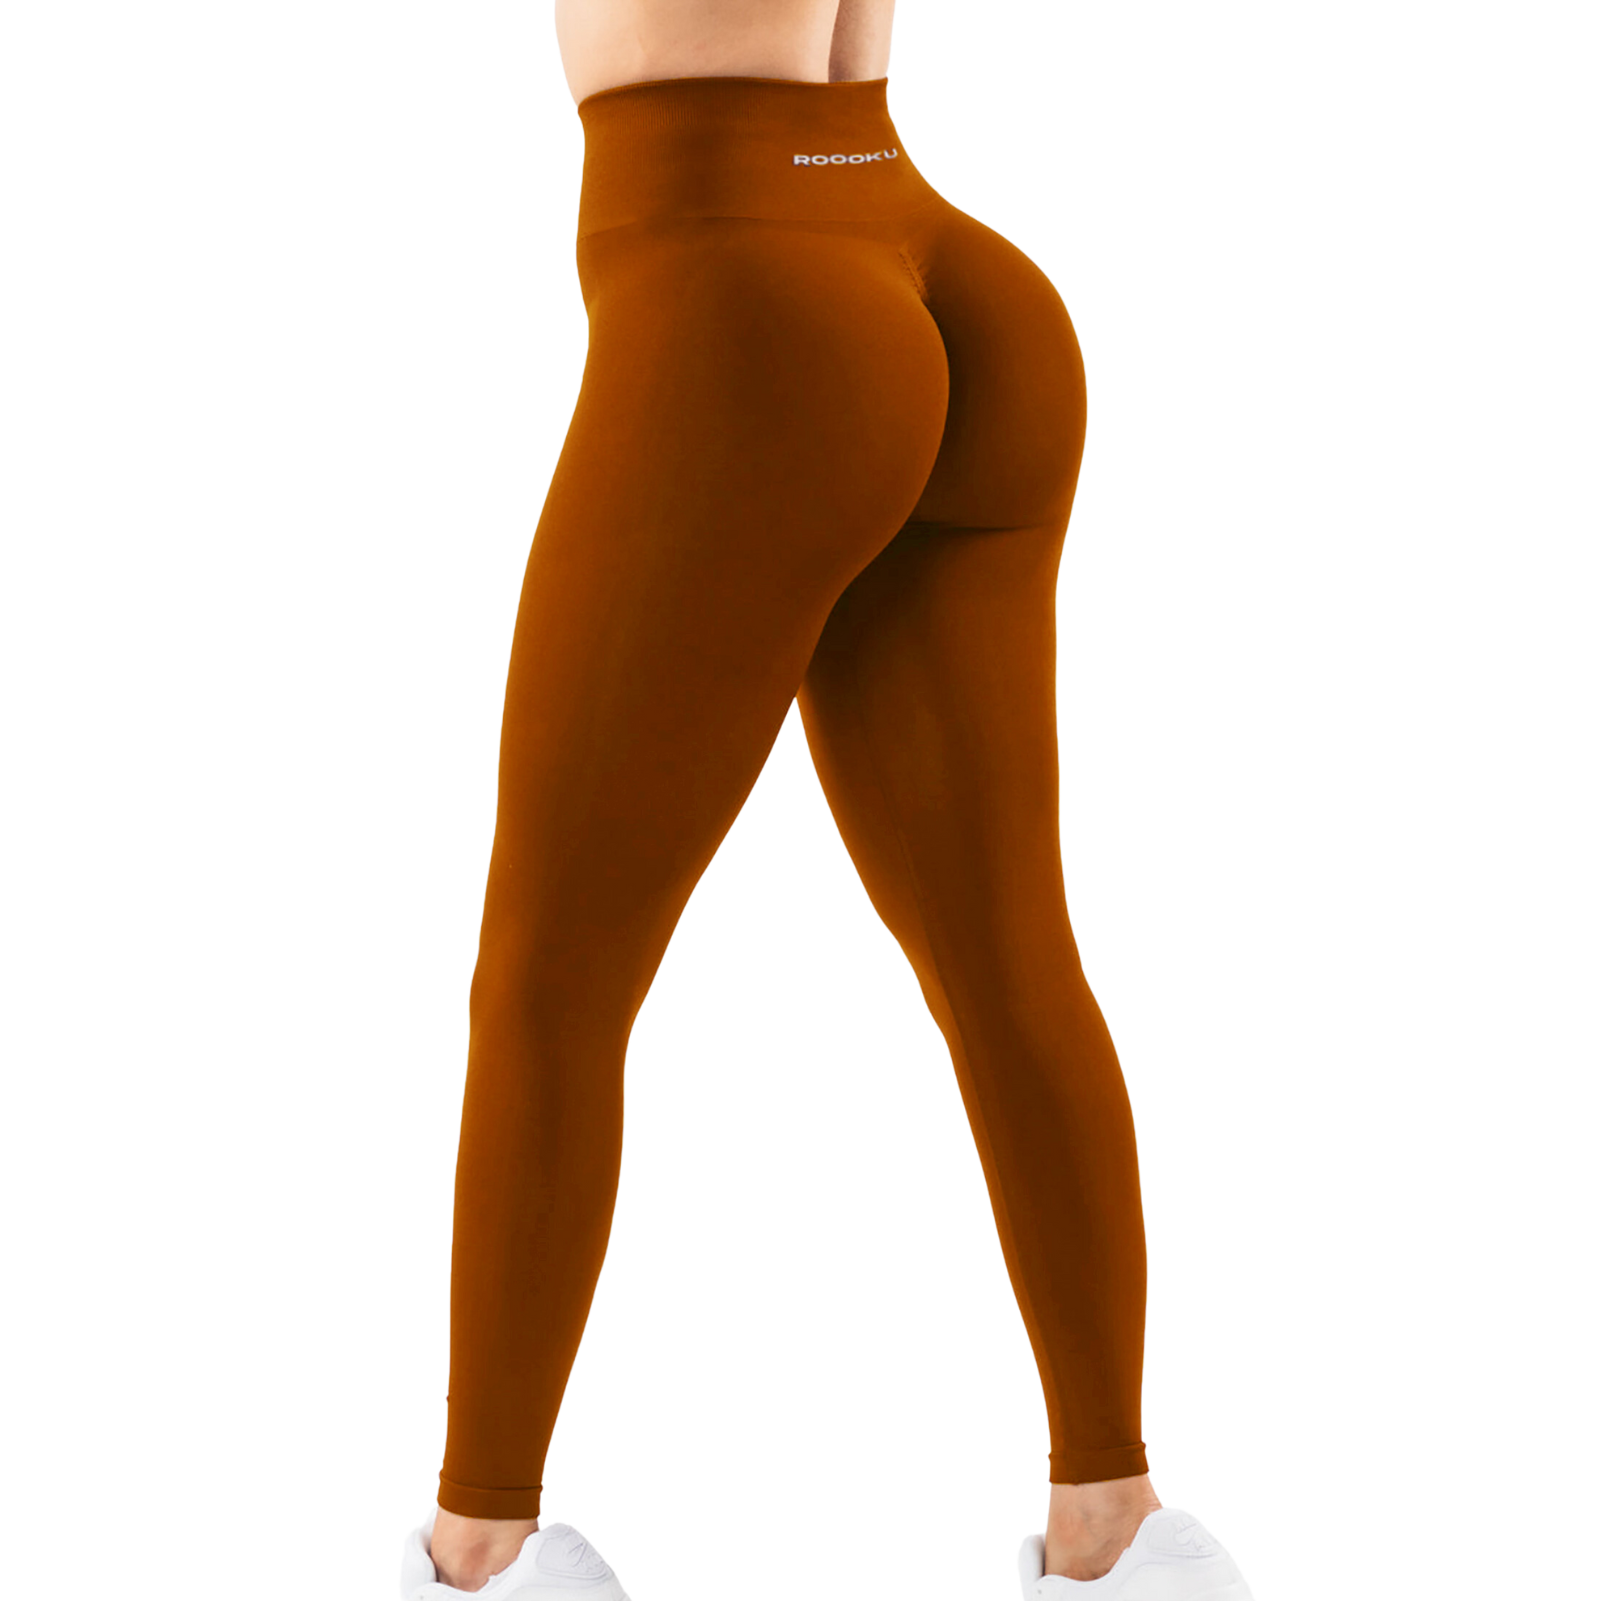 Fitness workout leggings - Roxy - Scrunch back - Squat proof - Seamles –  Squat or Not